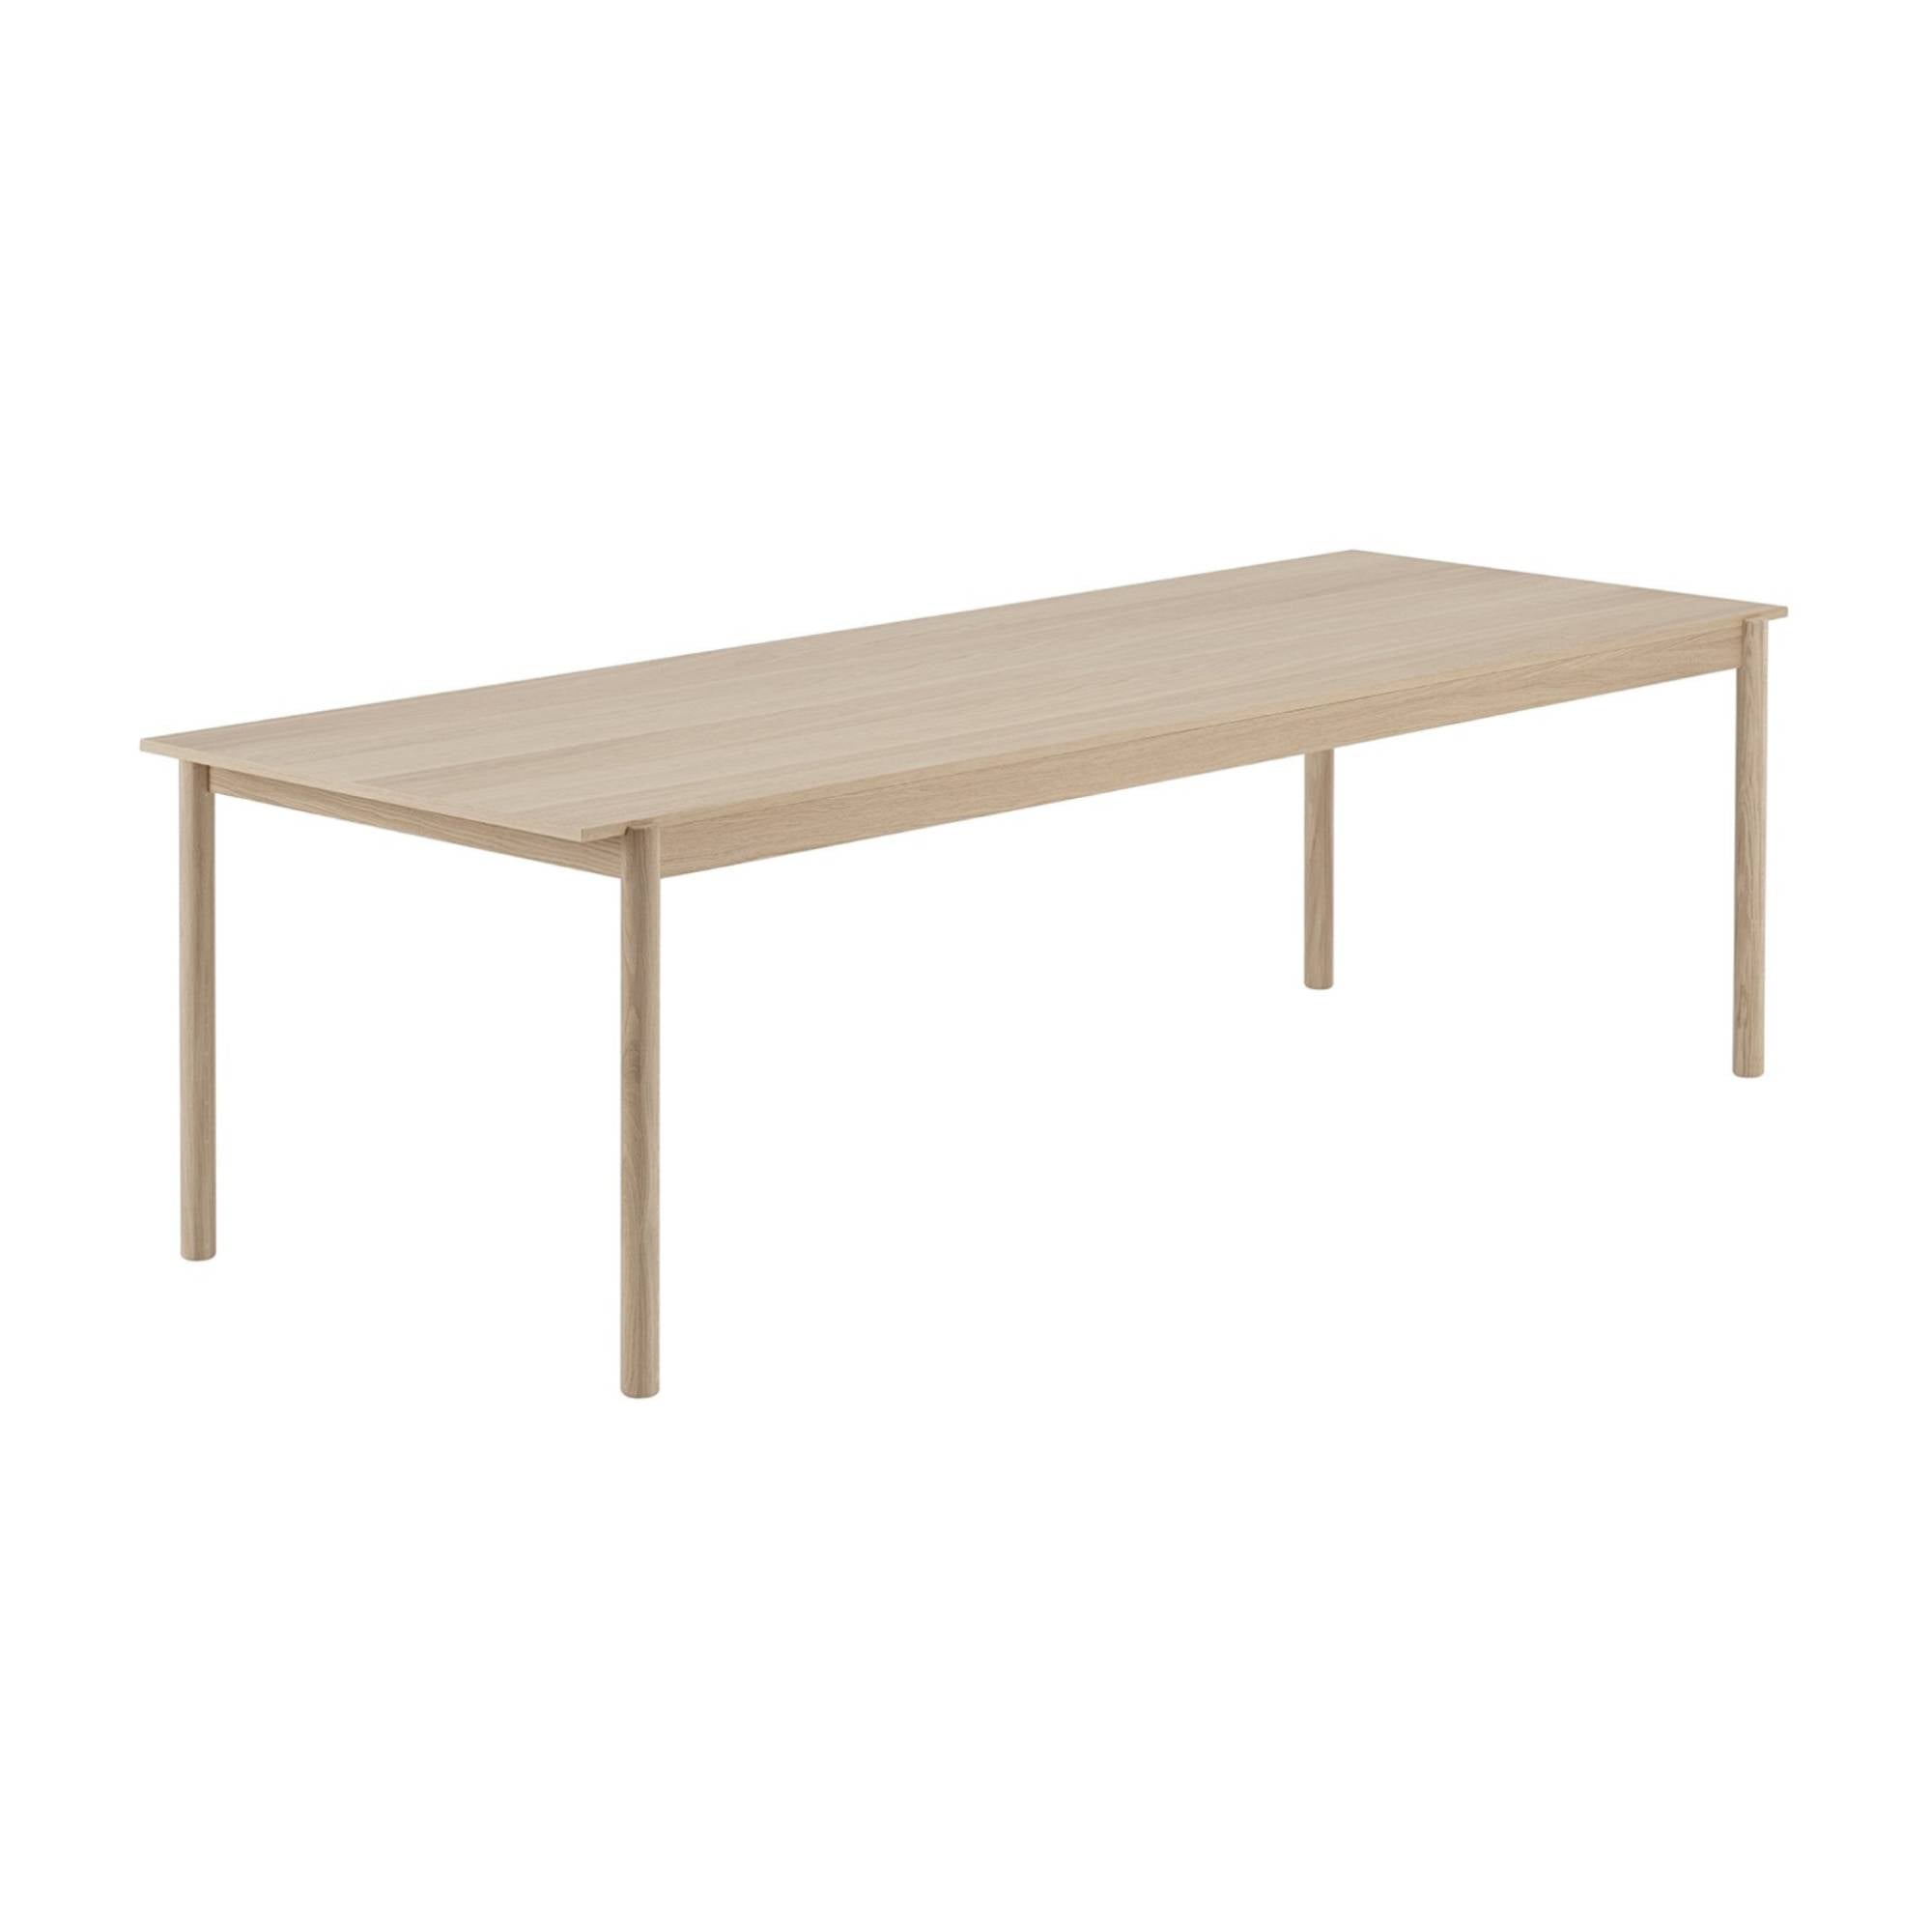 Linear Wood Table: Large - 102.4